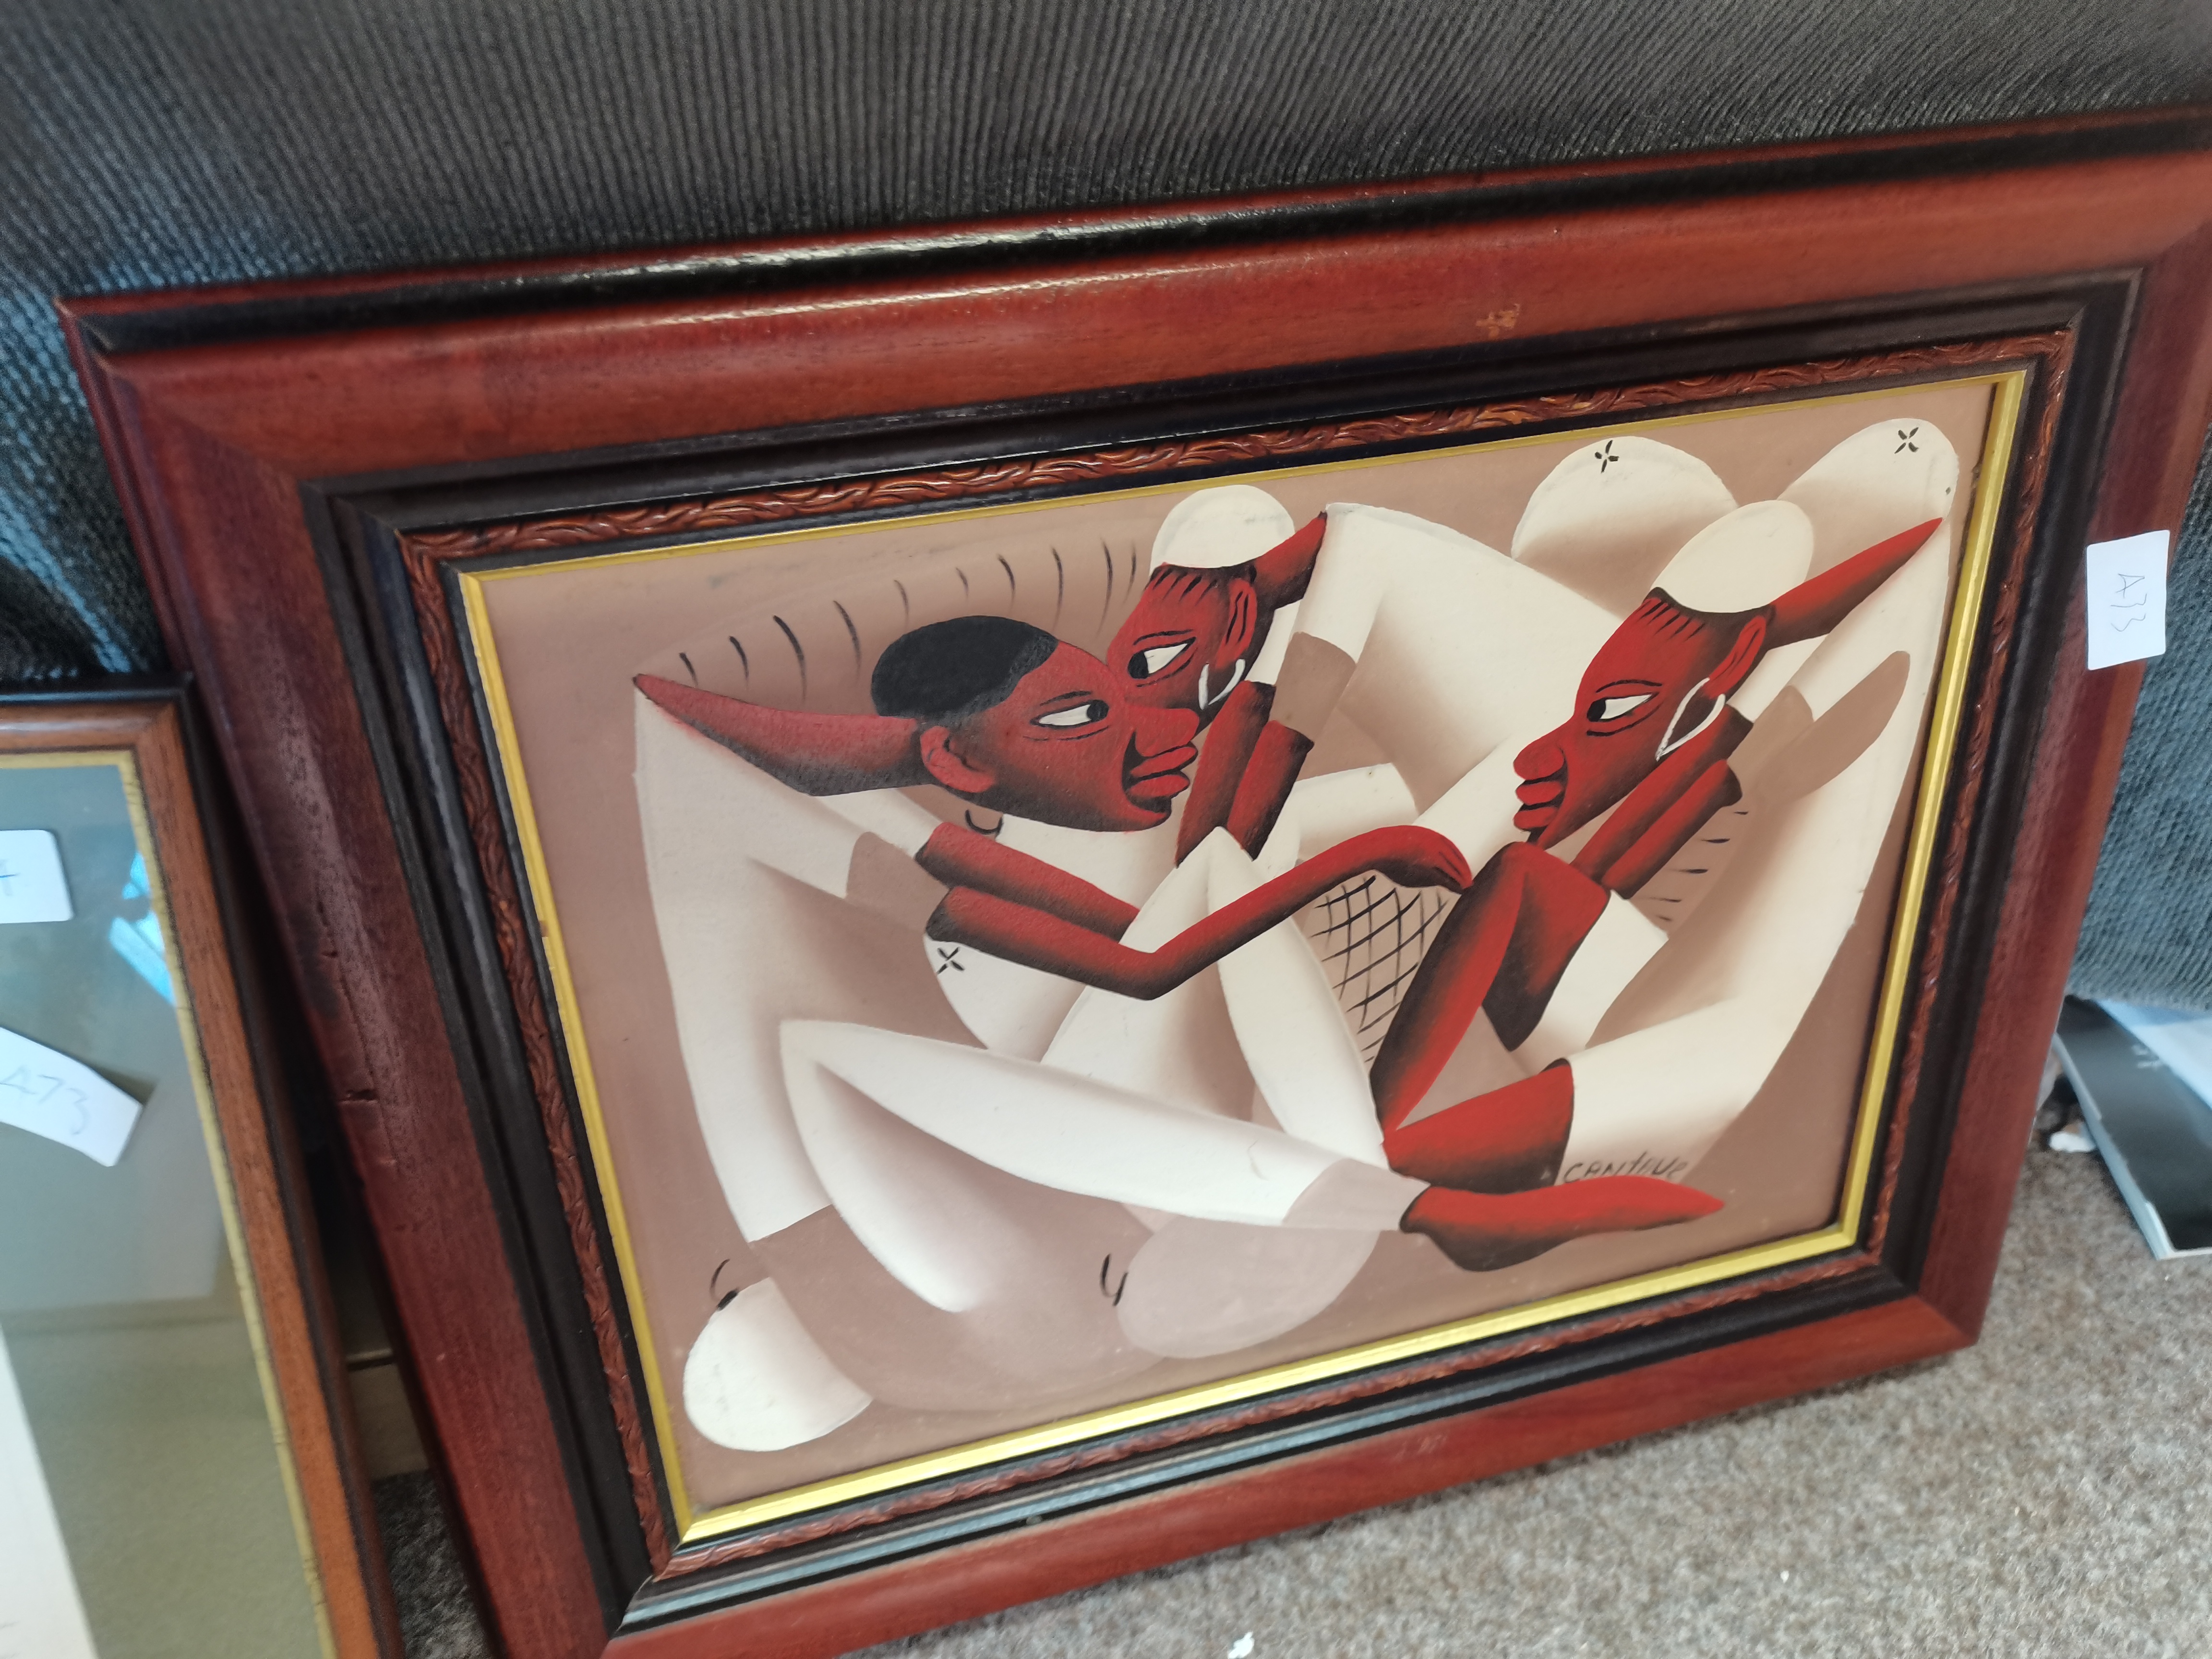 Framed engraving "Seesaw" 1795 plus 1960's oil on canvas by Joseph Cantave and framed print "Duck - Image 4 of 4